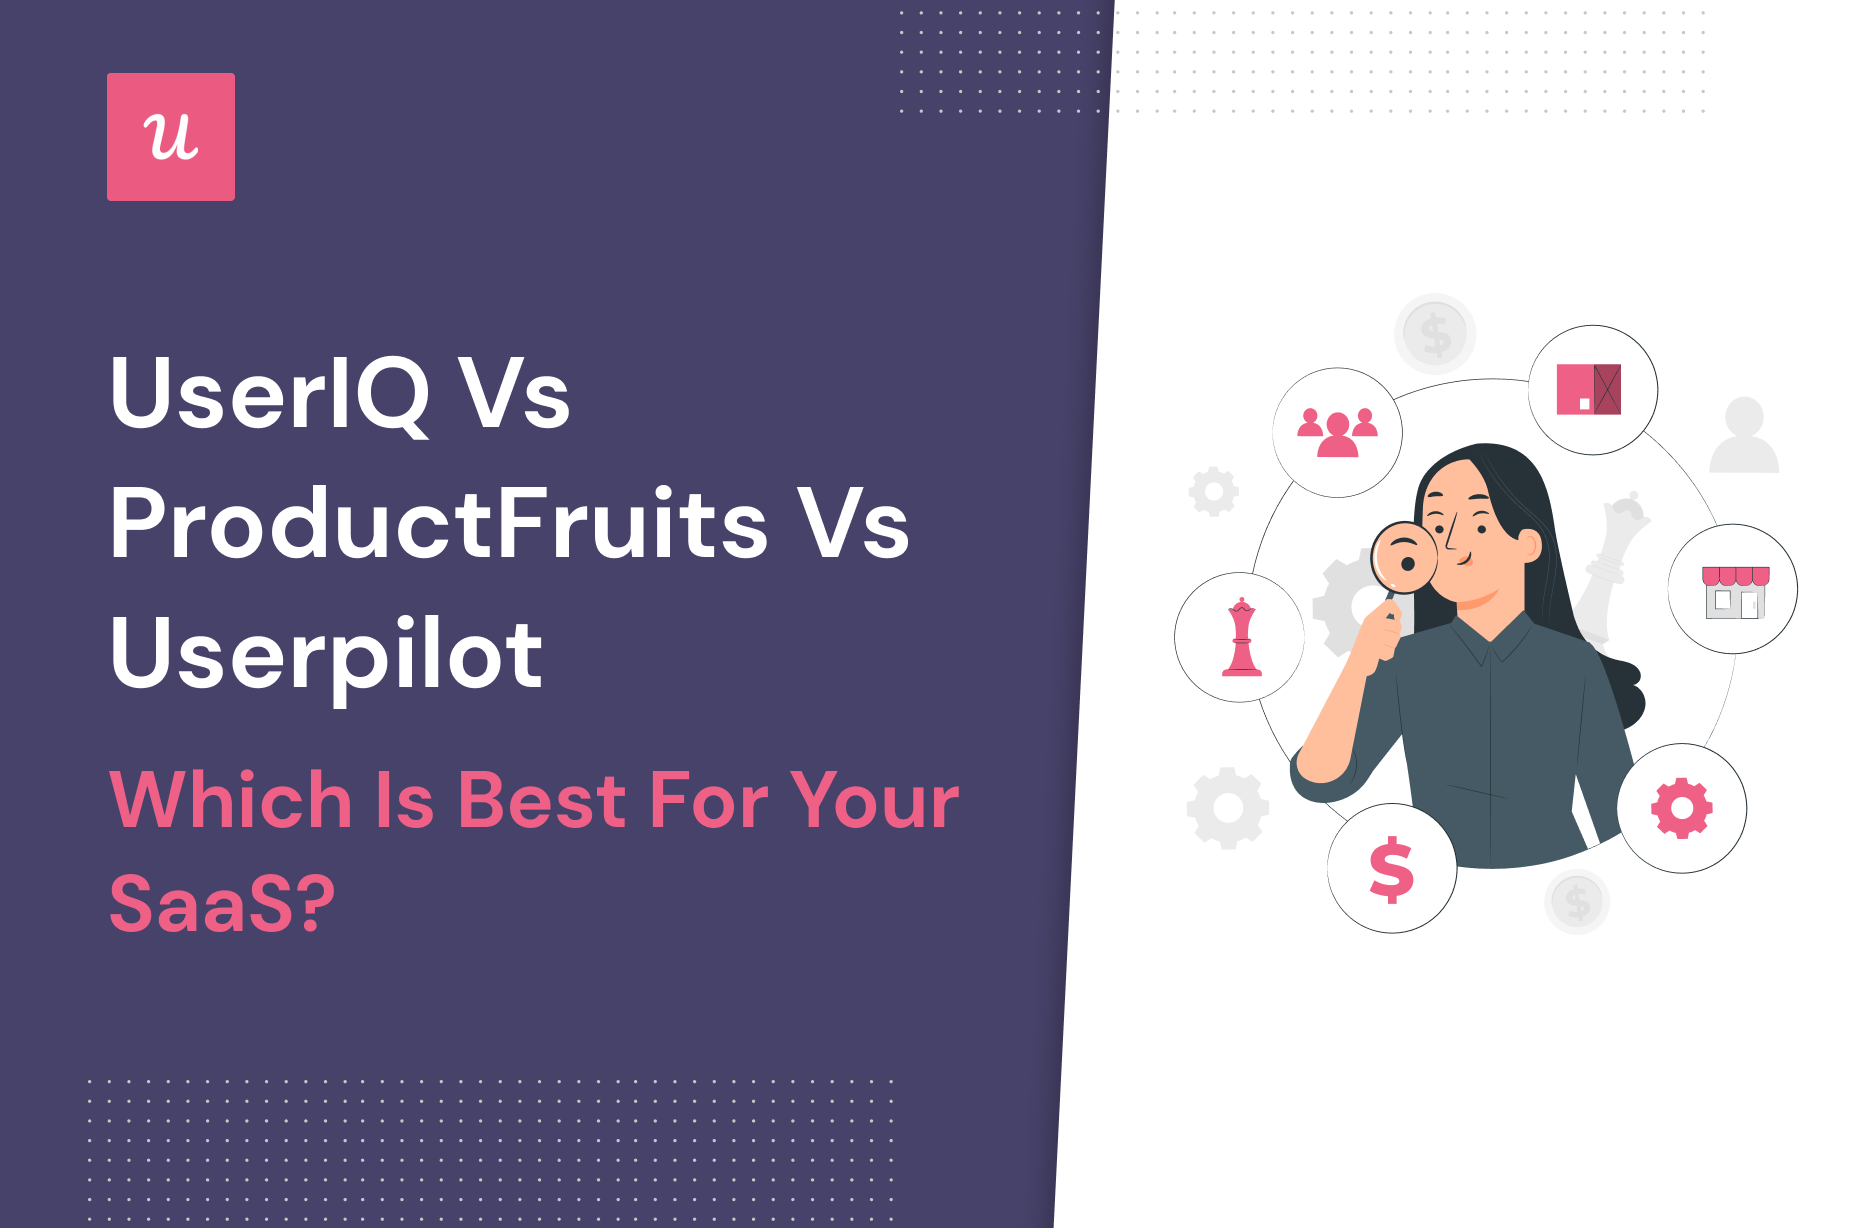 UserIQ vs ProductFruits vs Userpilot – Which is Best for Your SaaS